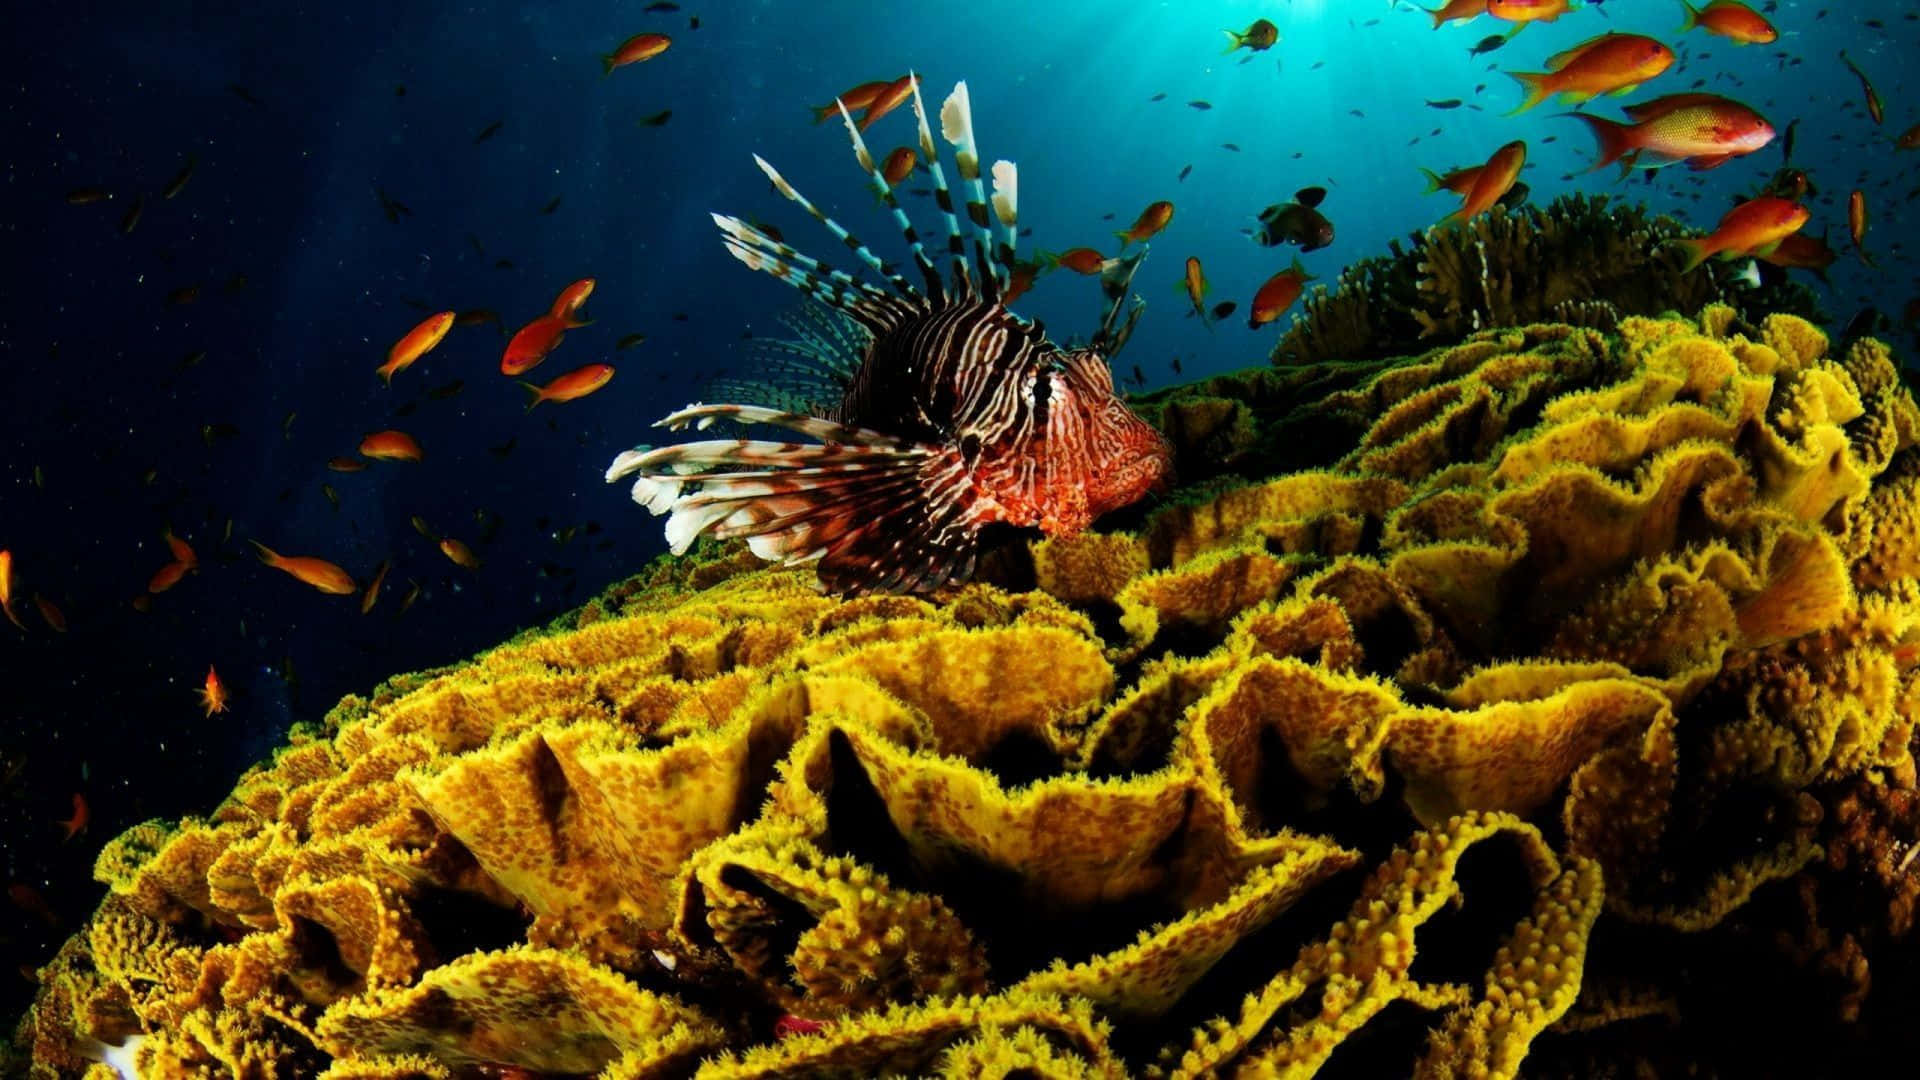 A Vibrant Coral Reef in a Pristine Underwater Environment